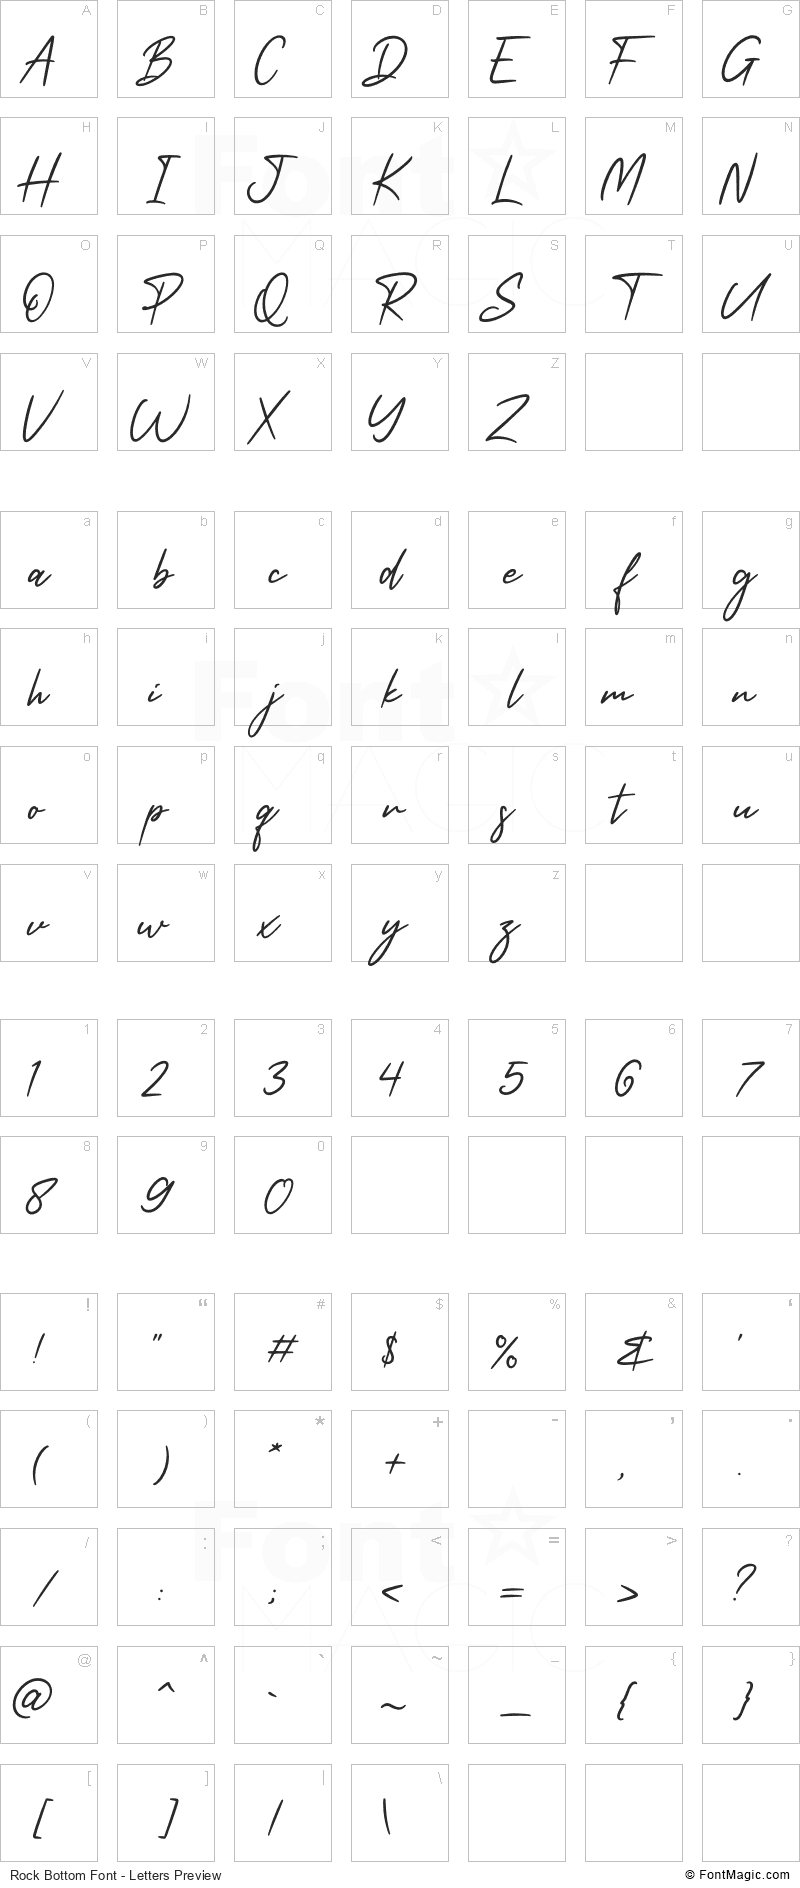 Rock Bottom Font - All Latters Preview Chart